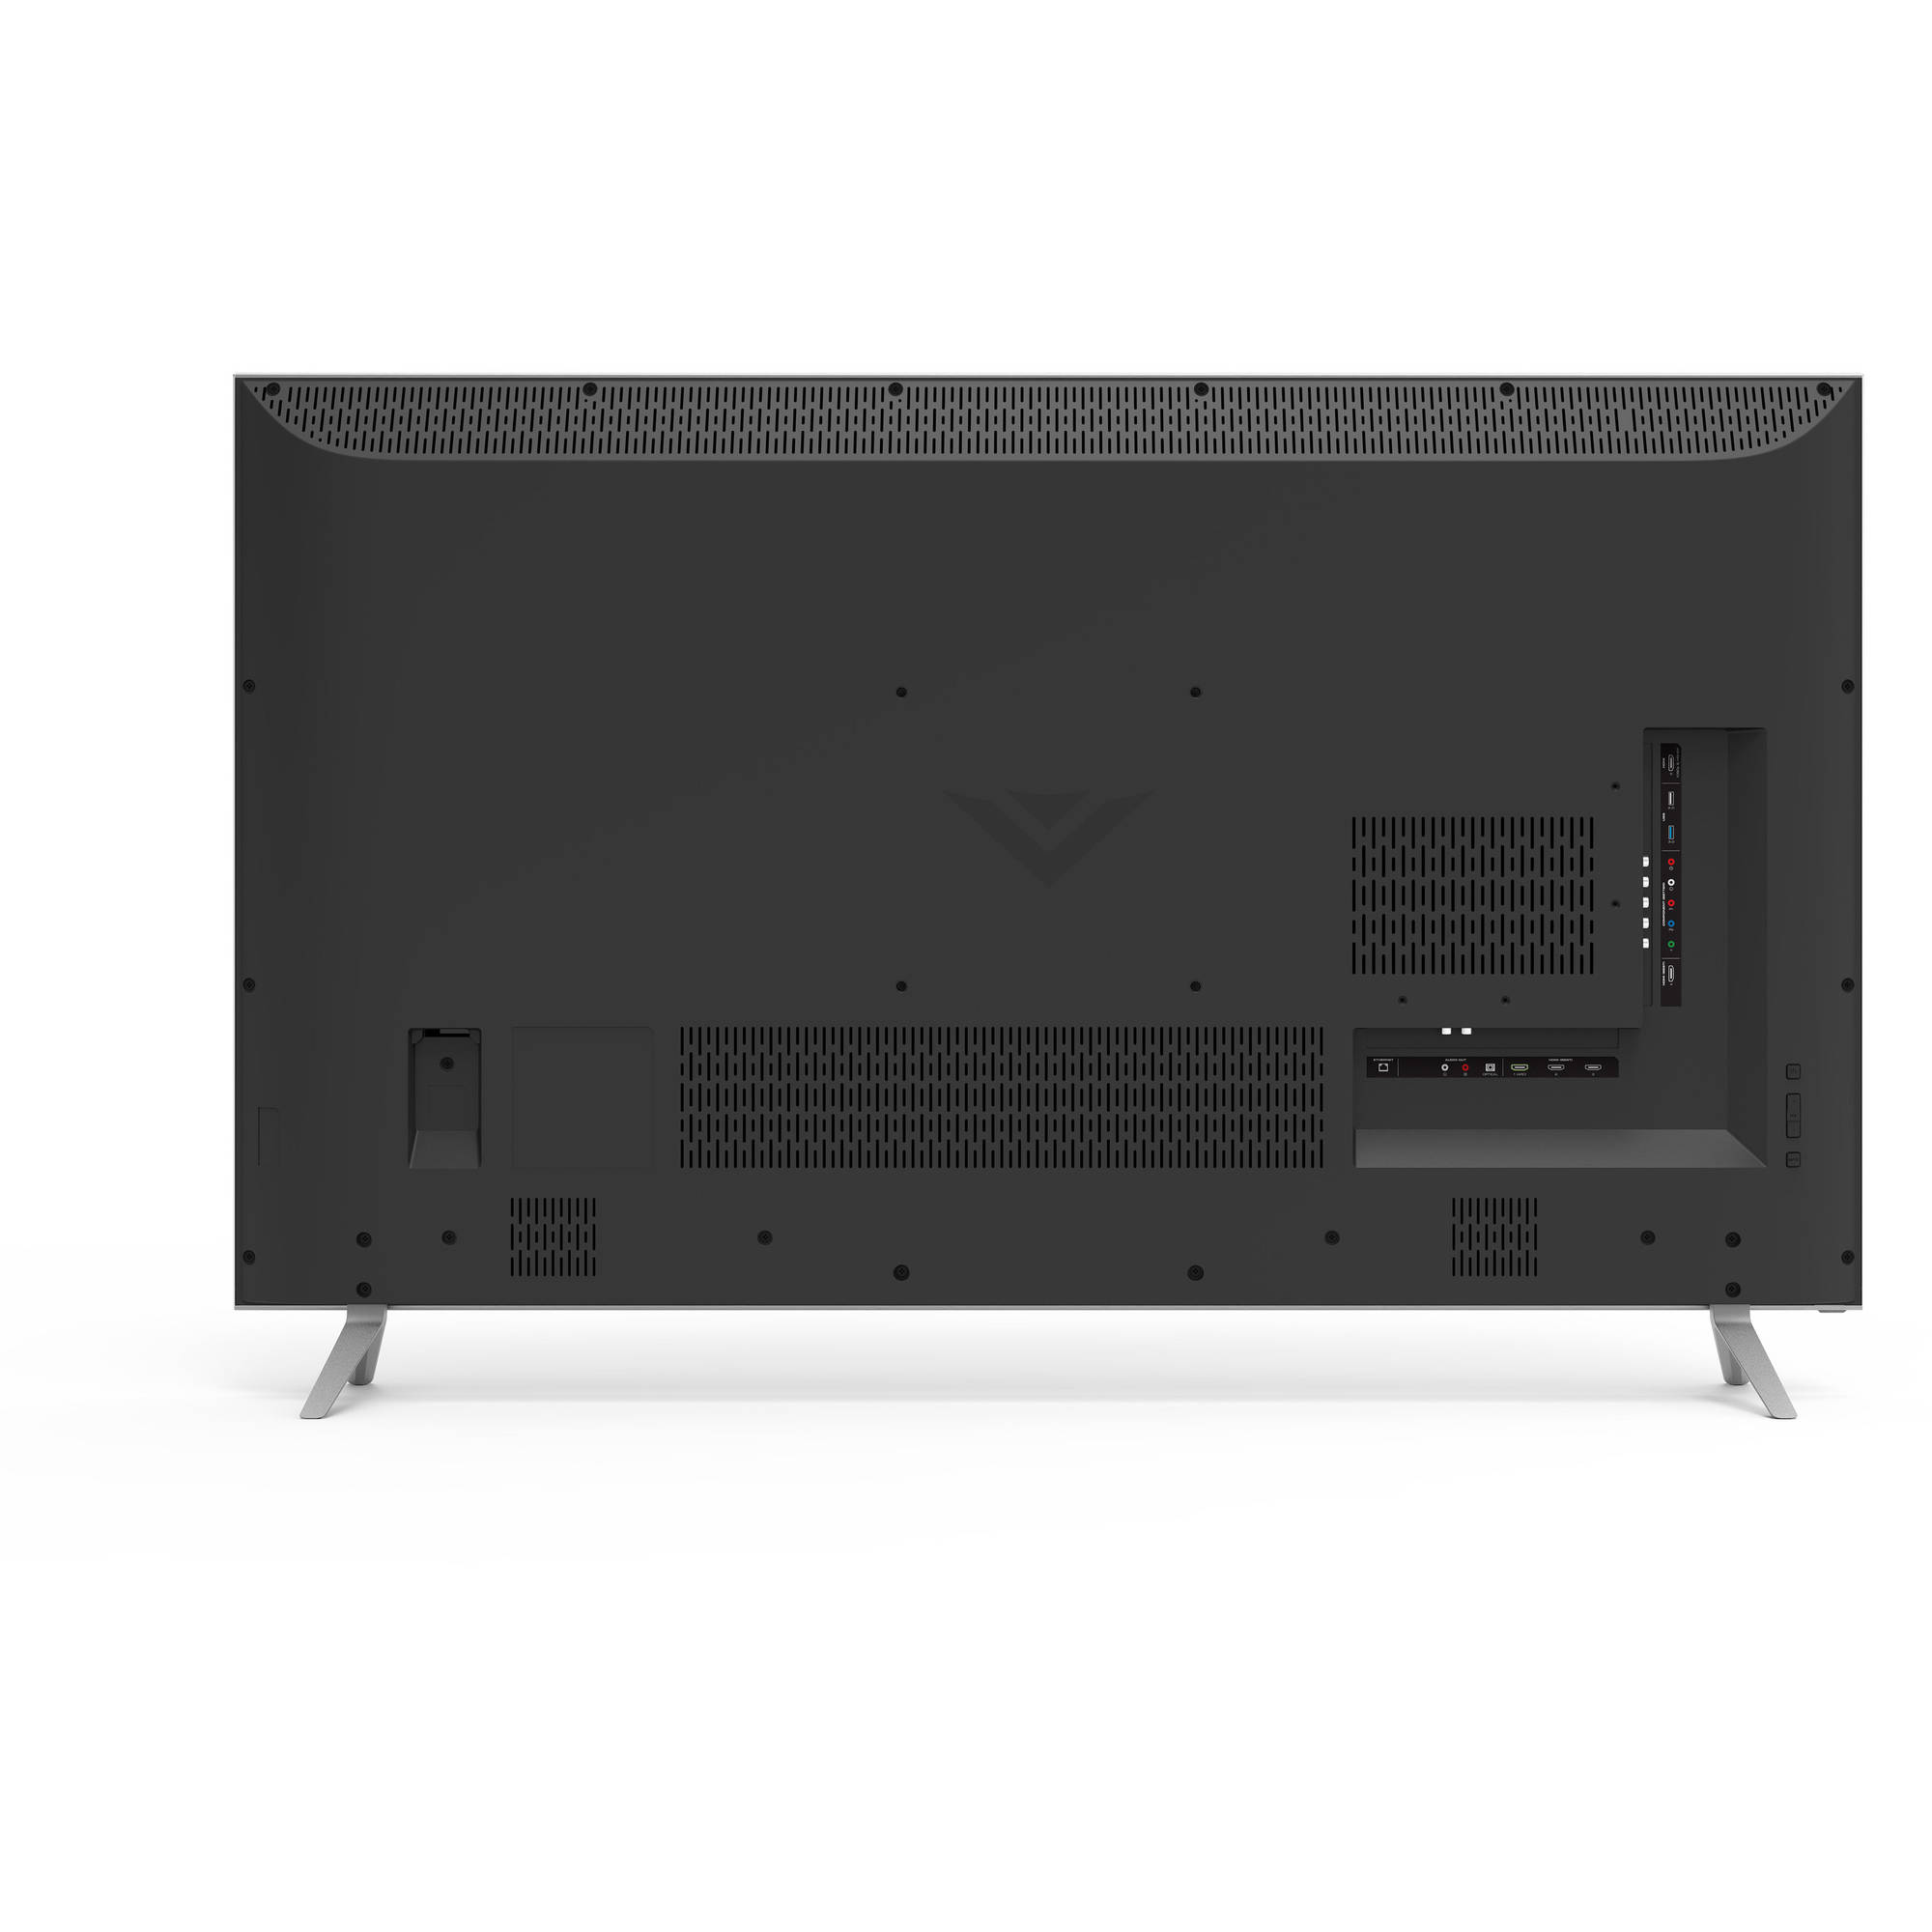 VIZIO SmartCast P-Series 75" Class (74.54" Diag.) 4K Ultra HD HDR 2160p 240Hz Full Array LED Smart Home Theater Display w/ Chromecast built-in (P75-C1) - image 8 of 17